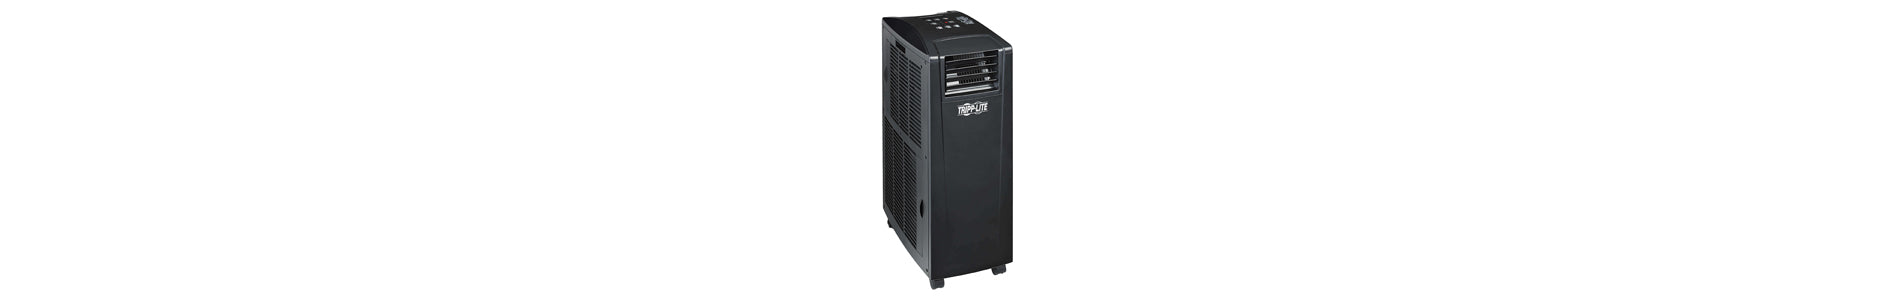 Rack Cooling - Air Conditioners